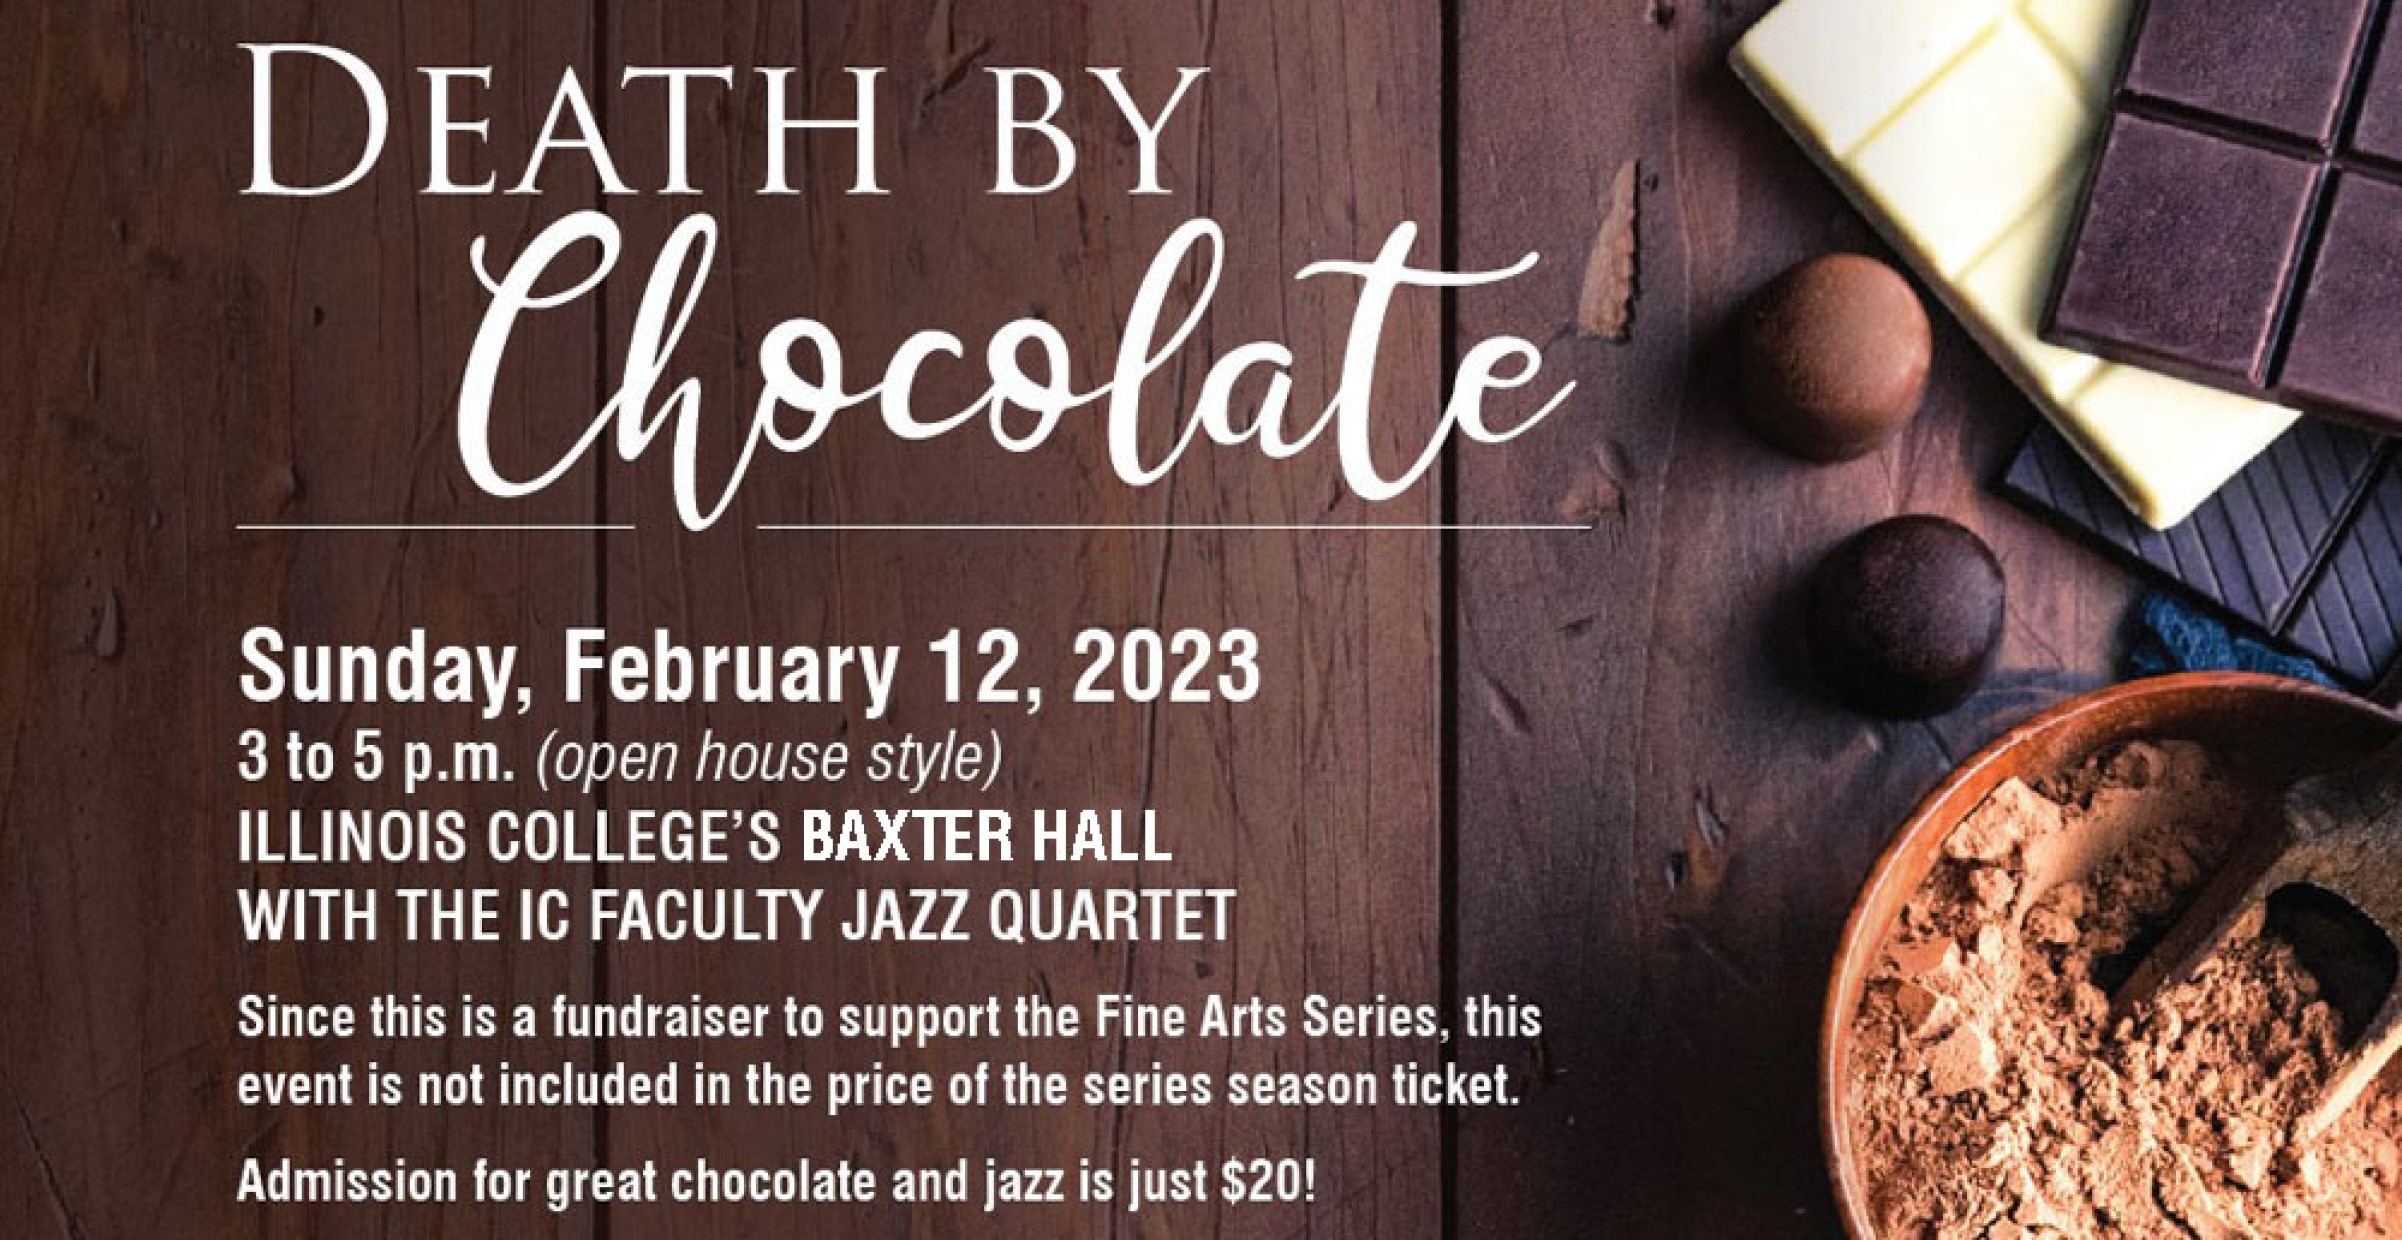 Death by Chocolate - Illinois College